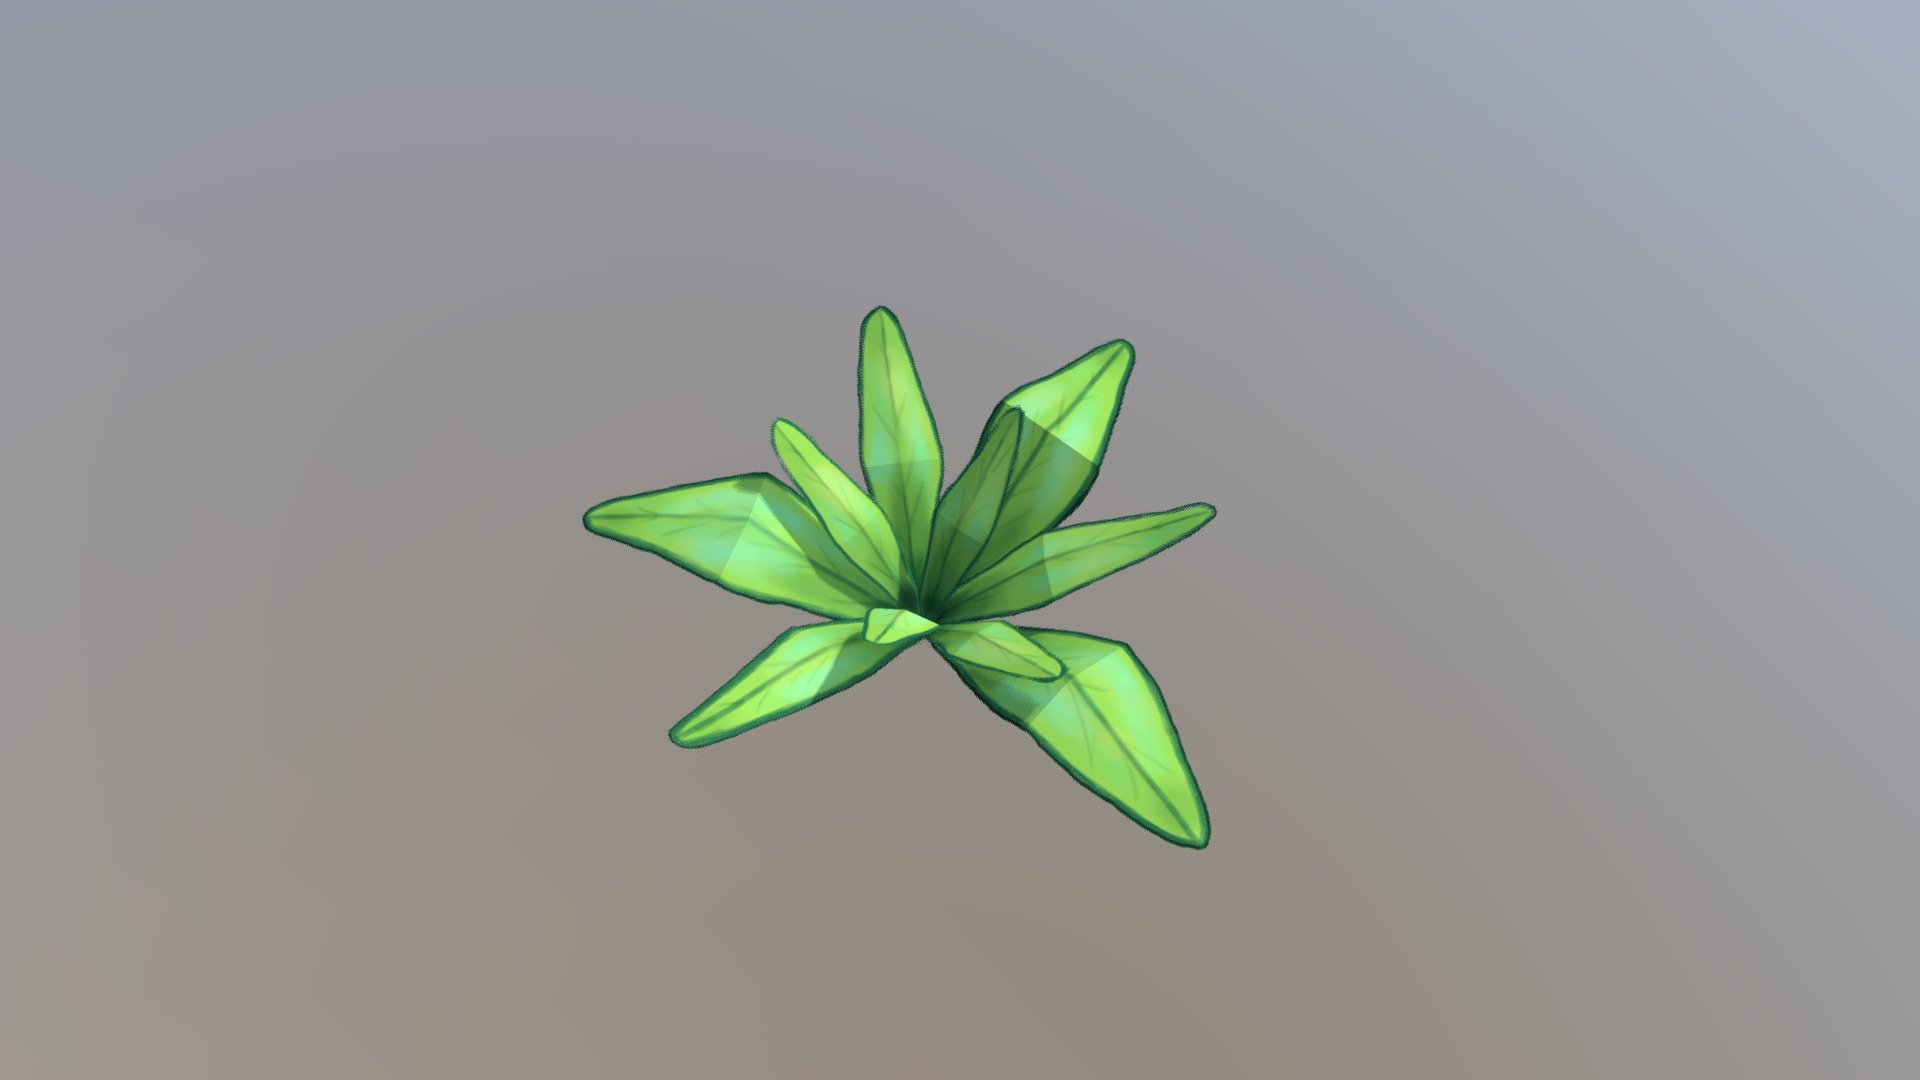 I created this plant in Blender 2.8 (Beta) and handpainted the leafs. The plant doesn't have any other textures yet, but maybe I will add a normal map later on.

Check out the Timelapse Video on youtube
https://youtu.be/AMmbOtwy3E0 - Small Stylized Handpainted Plant - Download Free 3D model by Izzy (@RigiT) 3d model